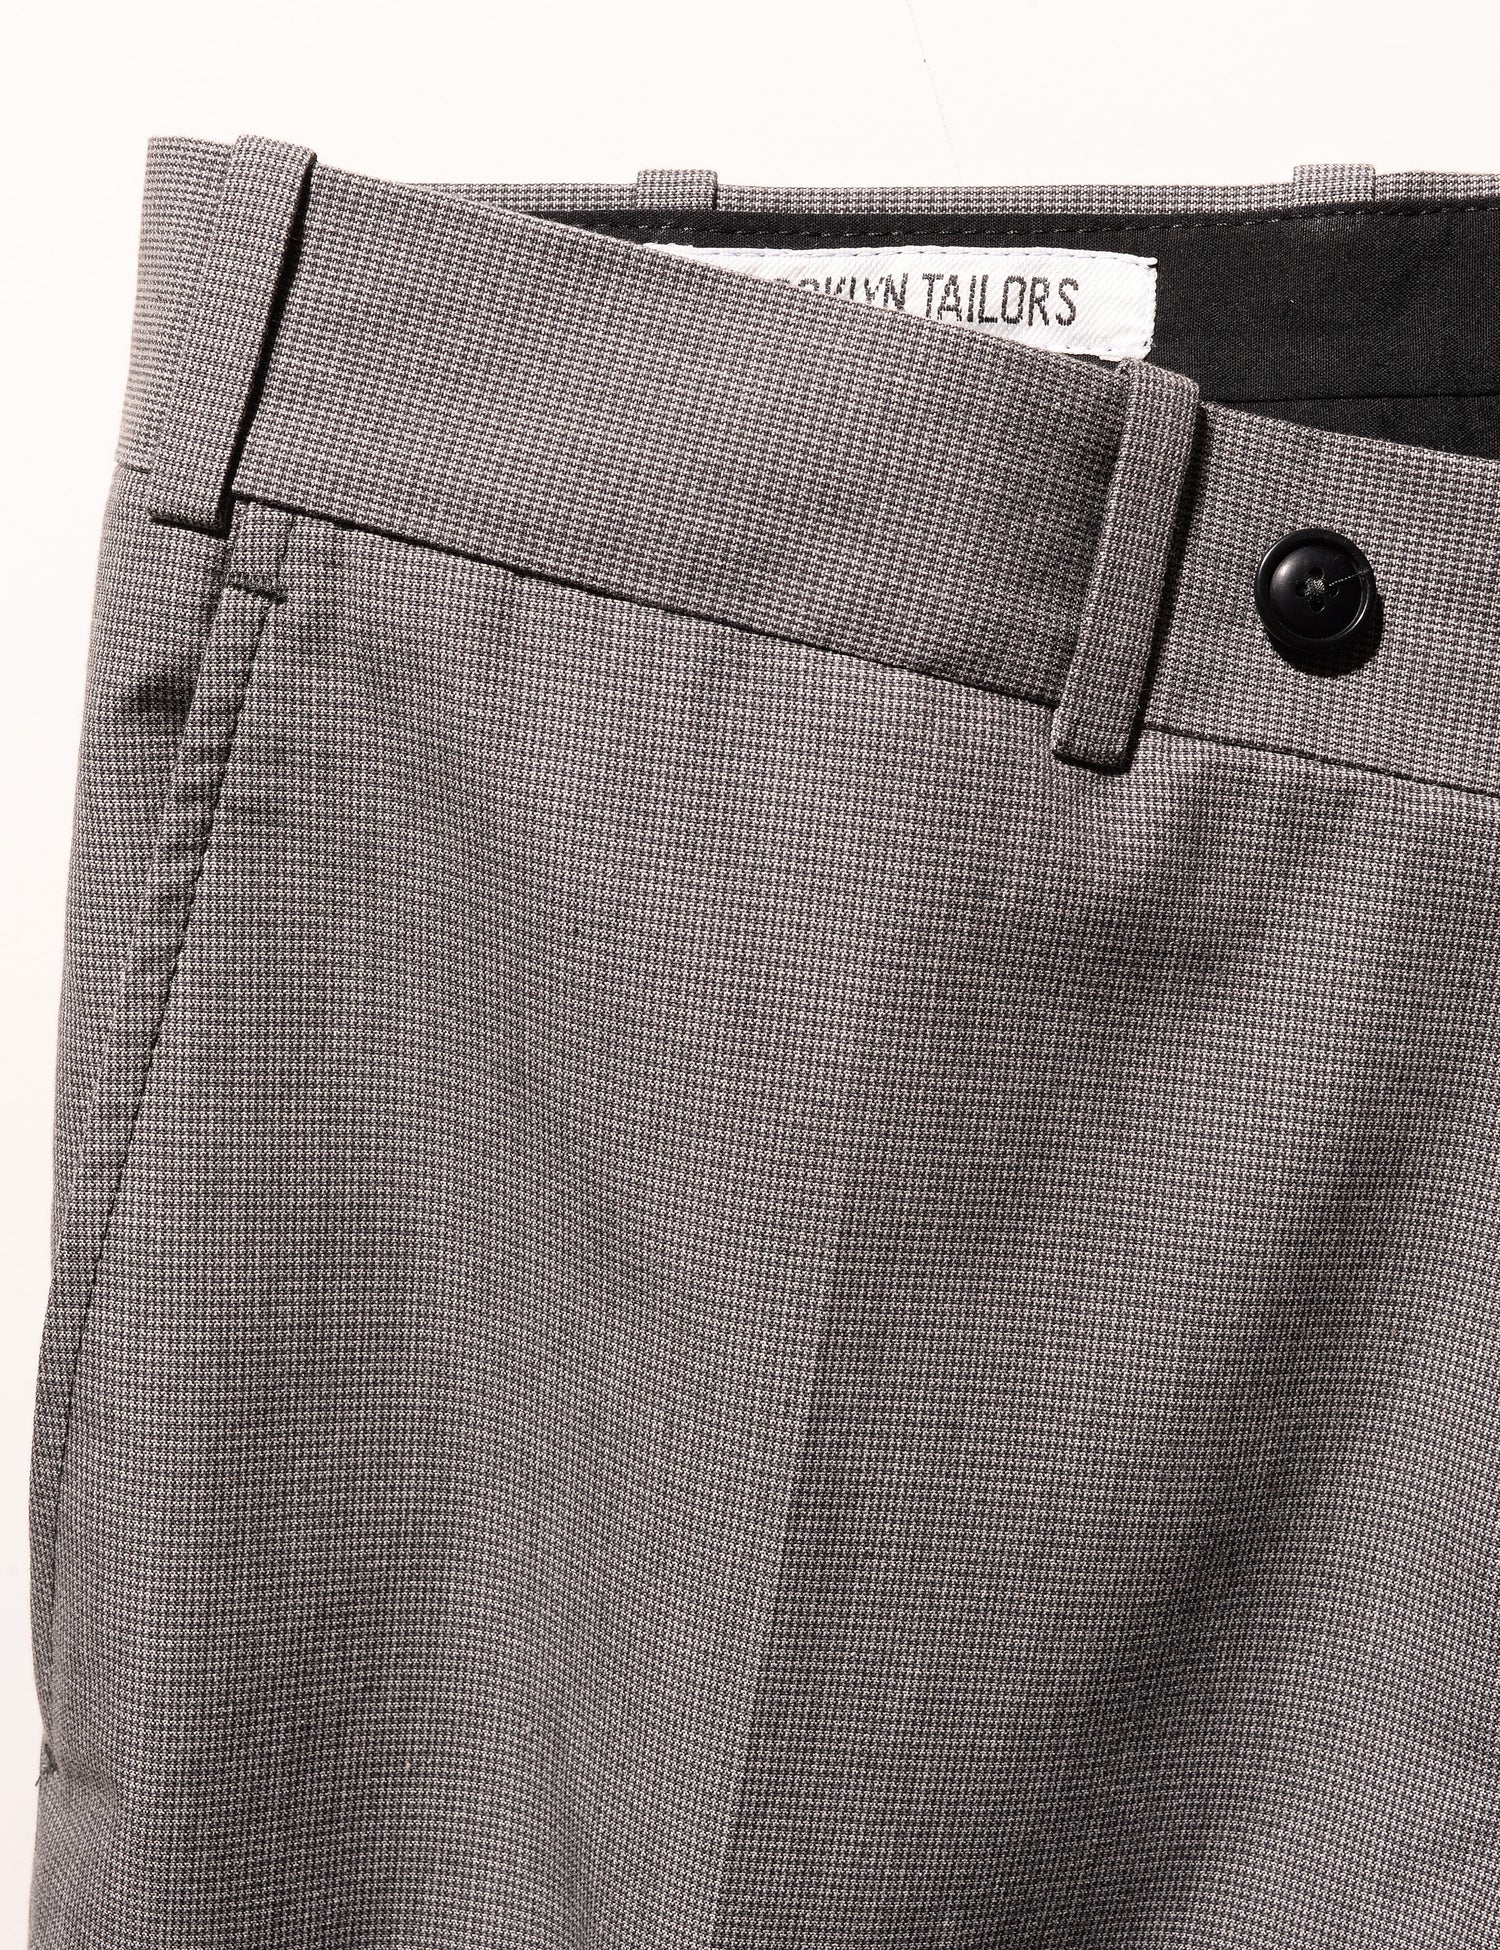 FINAL SALE: BKT50 Tailored Trousers in Cotton Micro Weave - Graphite